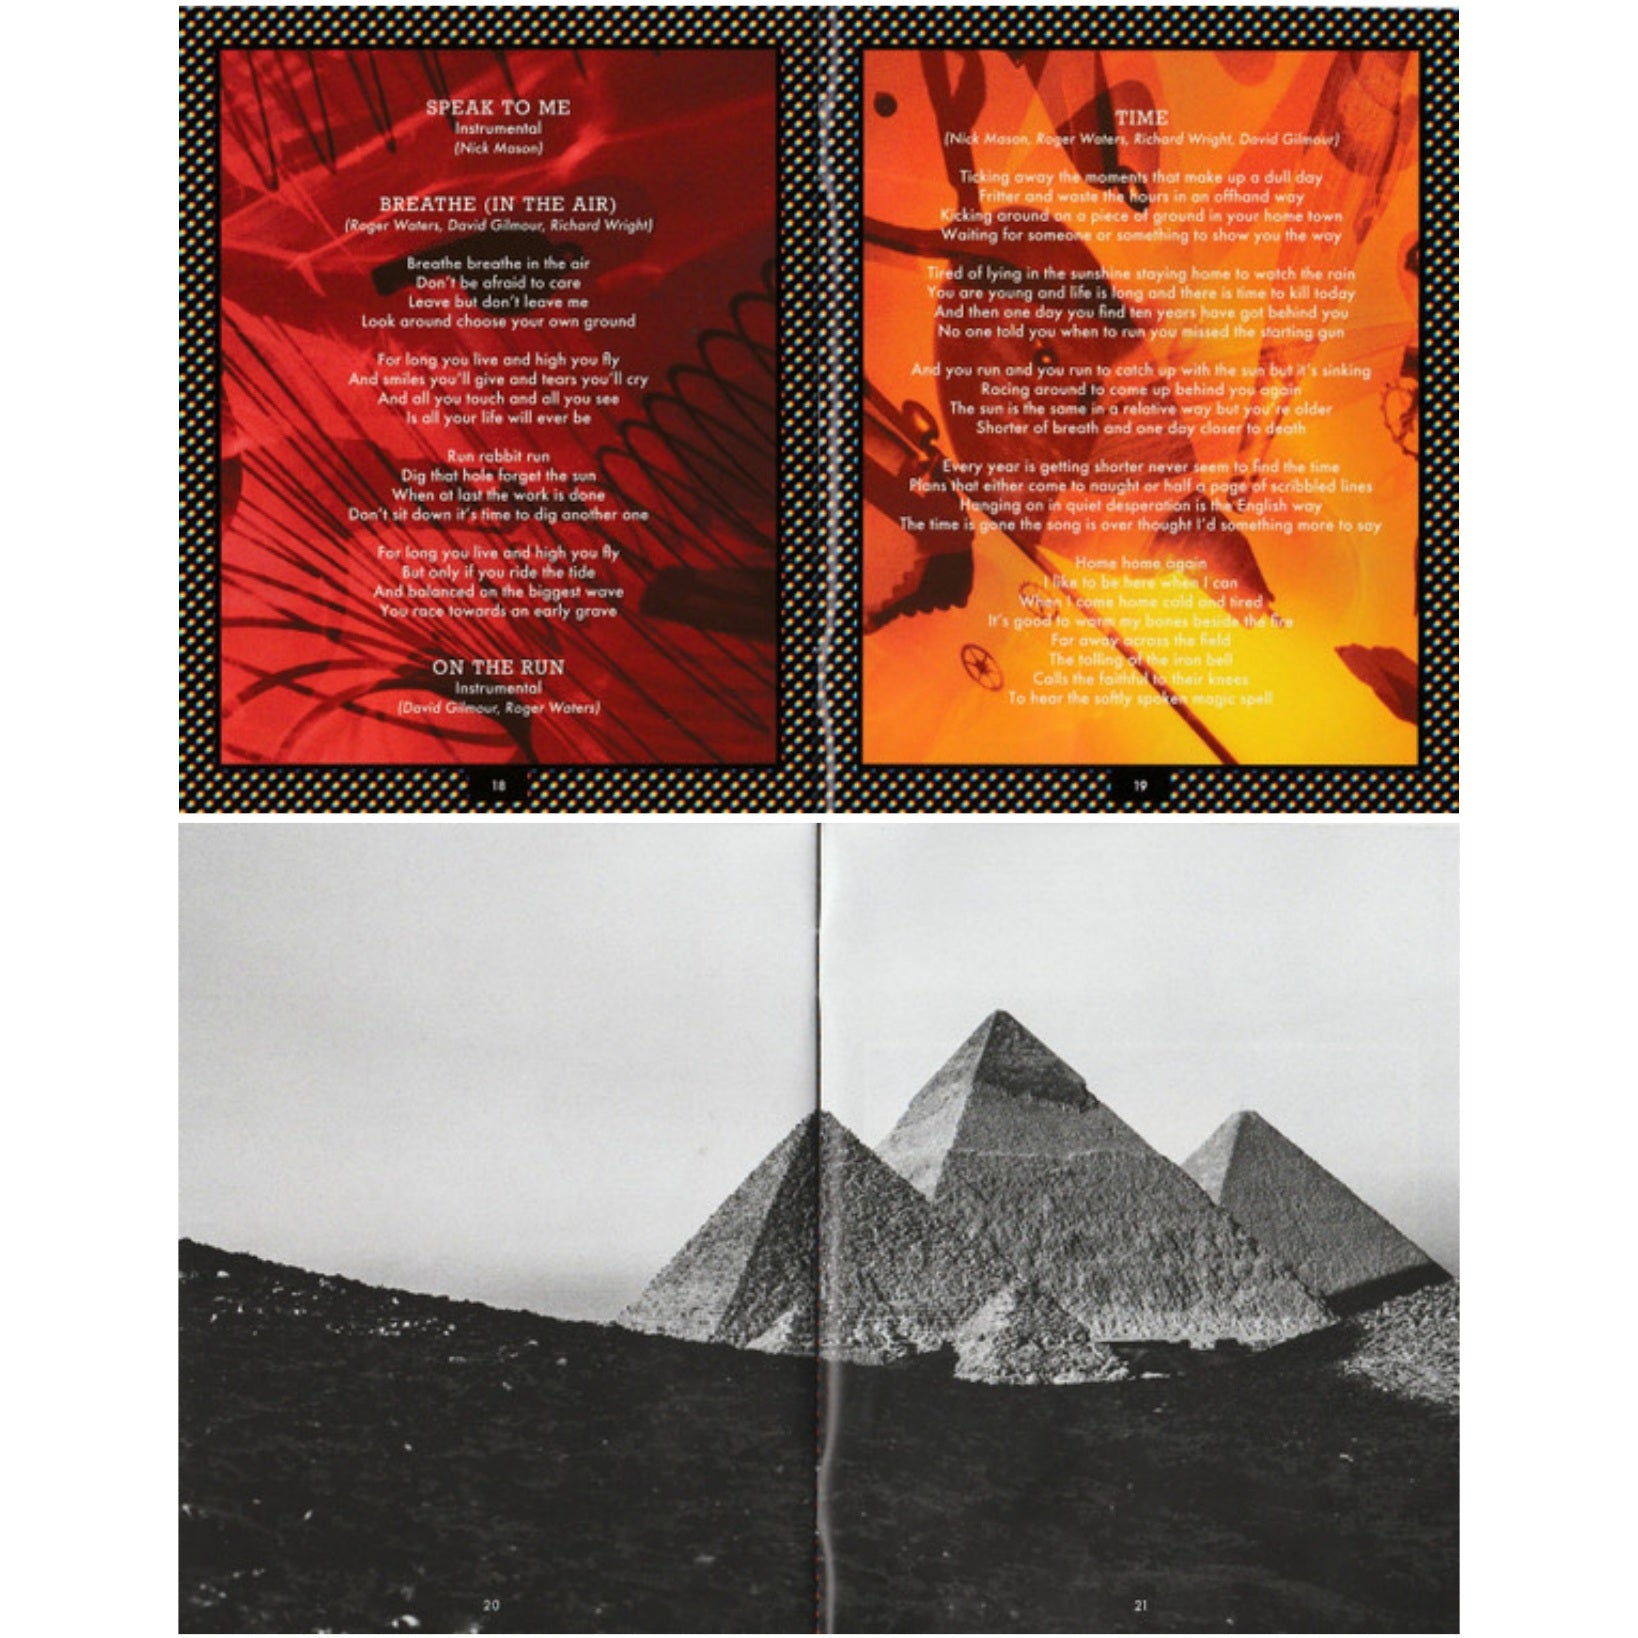 Pink-Floyd_Dark_Side_of_the_Moon_BD-A_Booklet